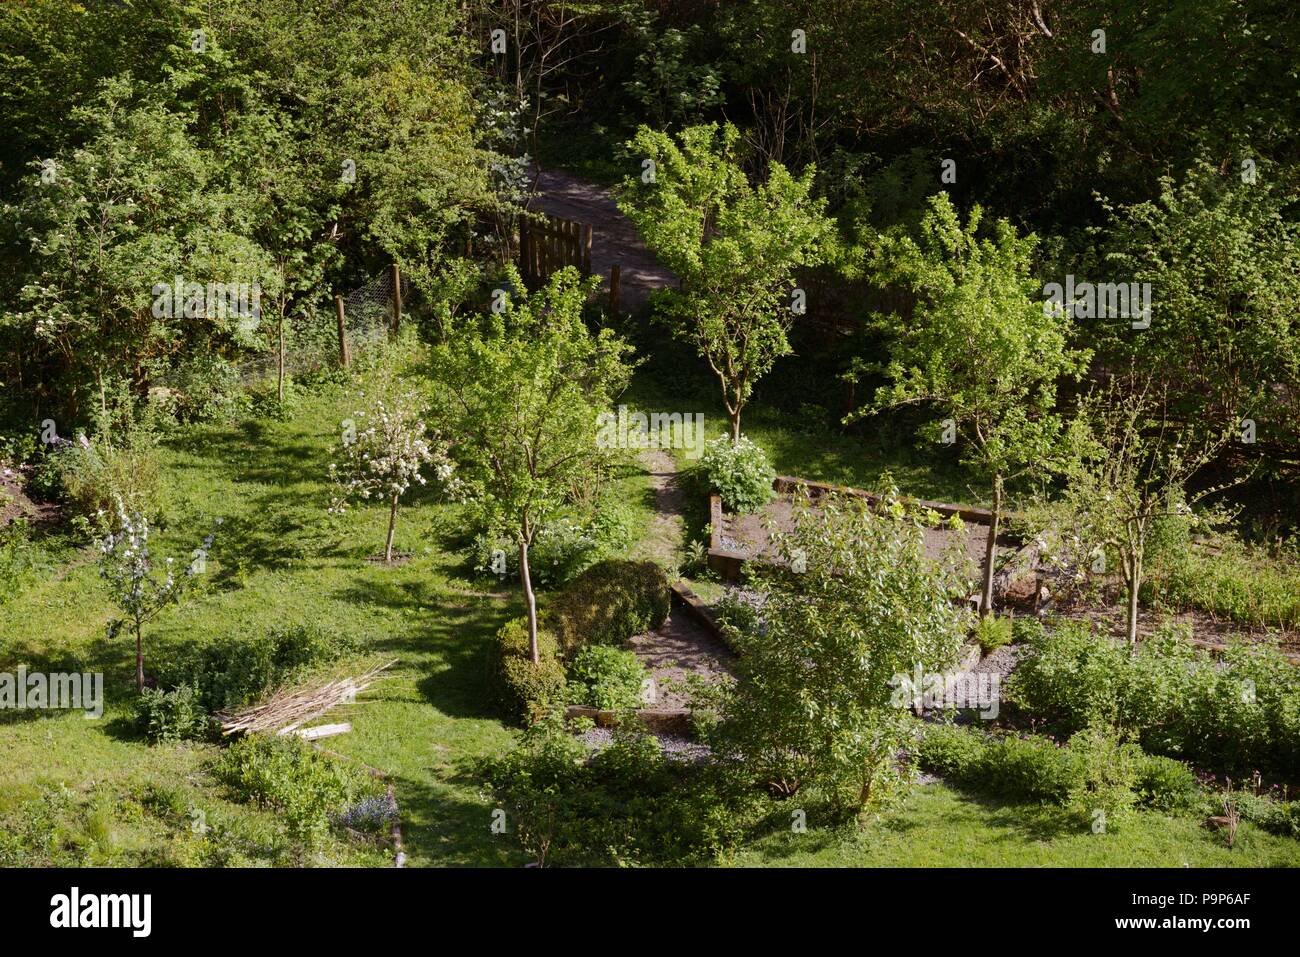 Forest garden, fruit trees with fruit bushes and vegetable beds, Wales UK Stock Photo